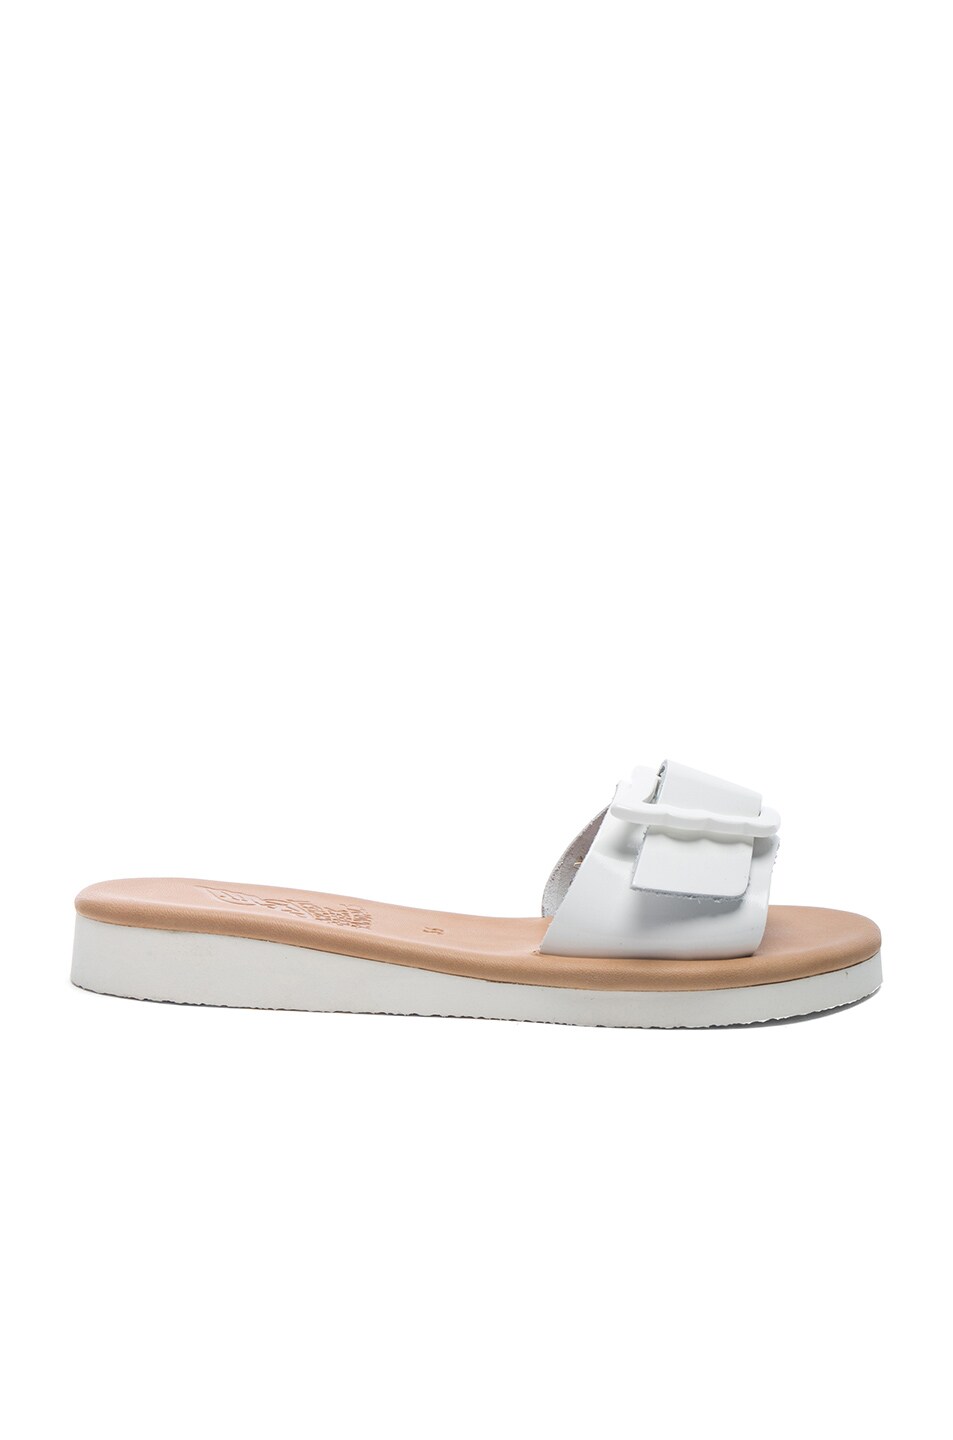 Image 1 of Ancient Greek Sandals Leather Aglaia Sandals in White